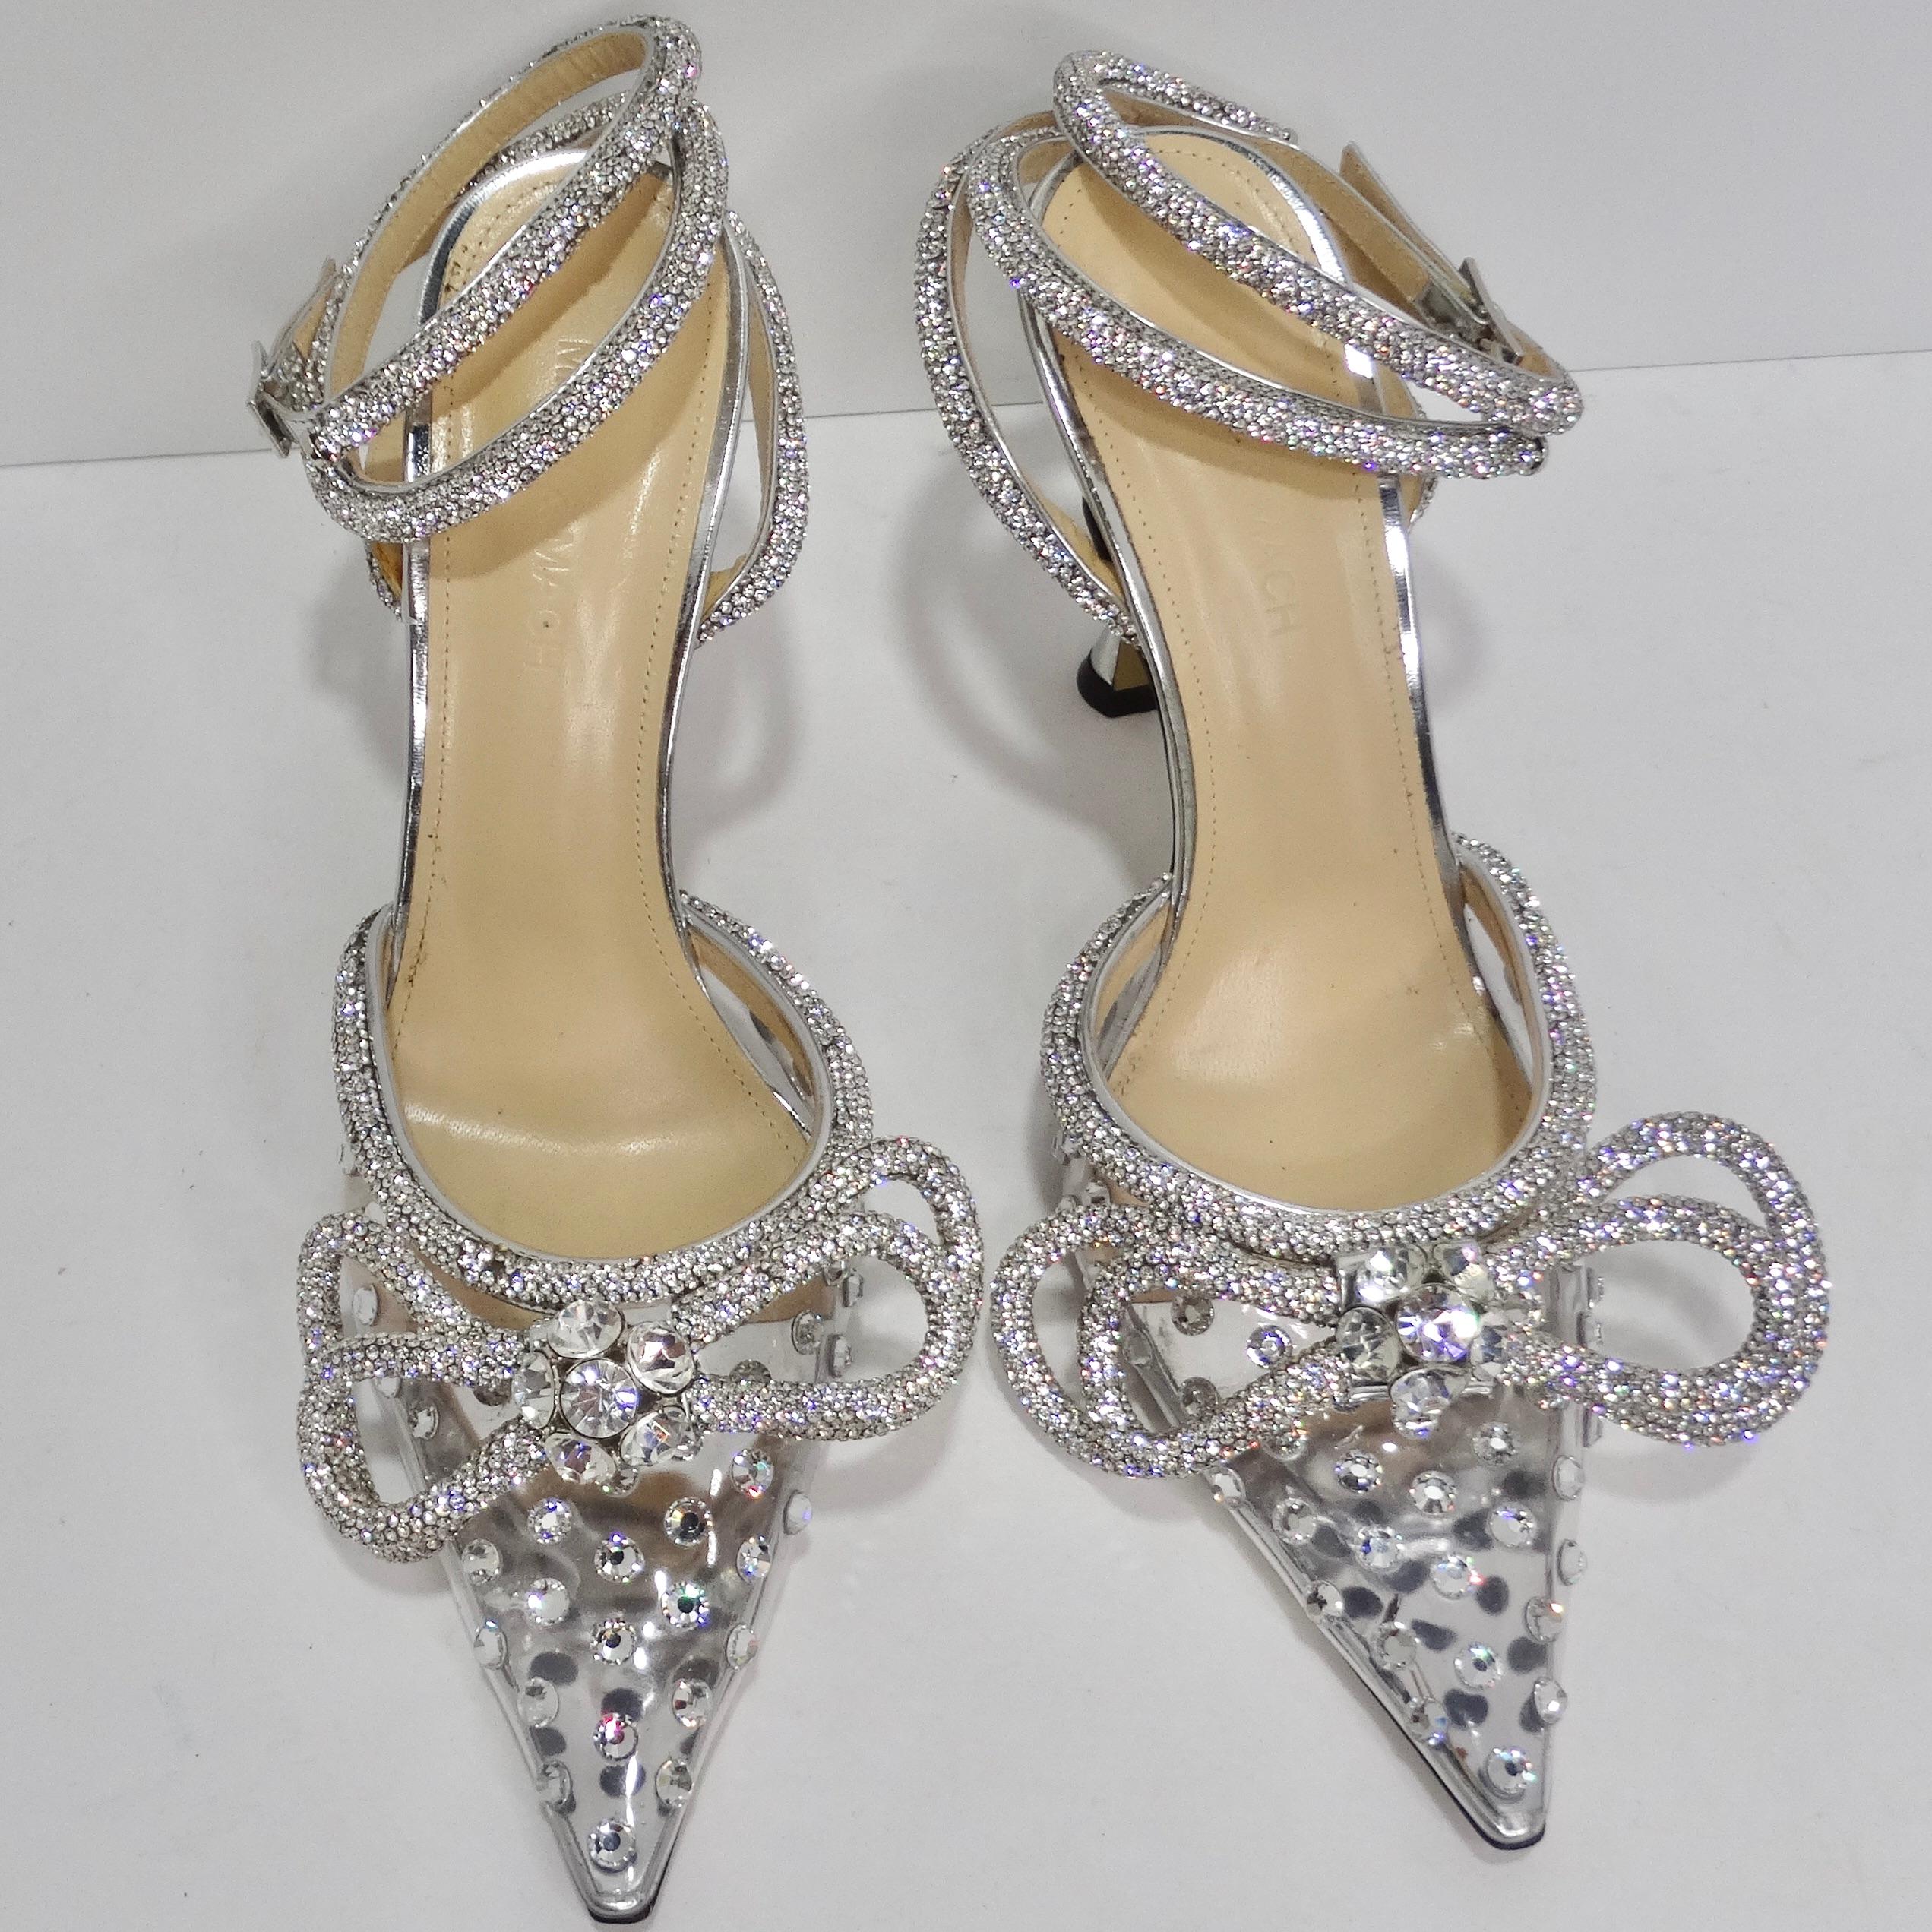 Introducing the epitome of elegance and glamour: the Mach & Mach Silver Double Bow 100 Crystal PVC Pumps. Crafted with precision and passion in Italy, these stunning shoes are a testament to luxury and sophistication. Meticulously designed and